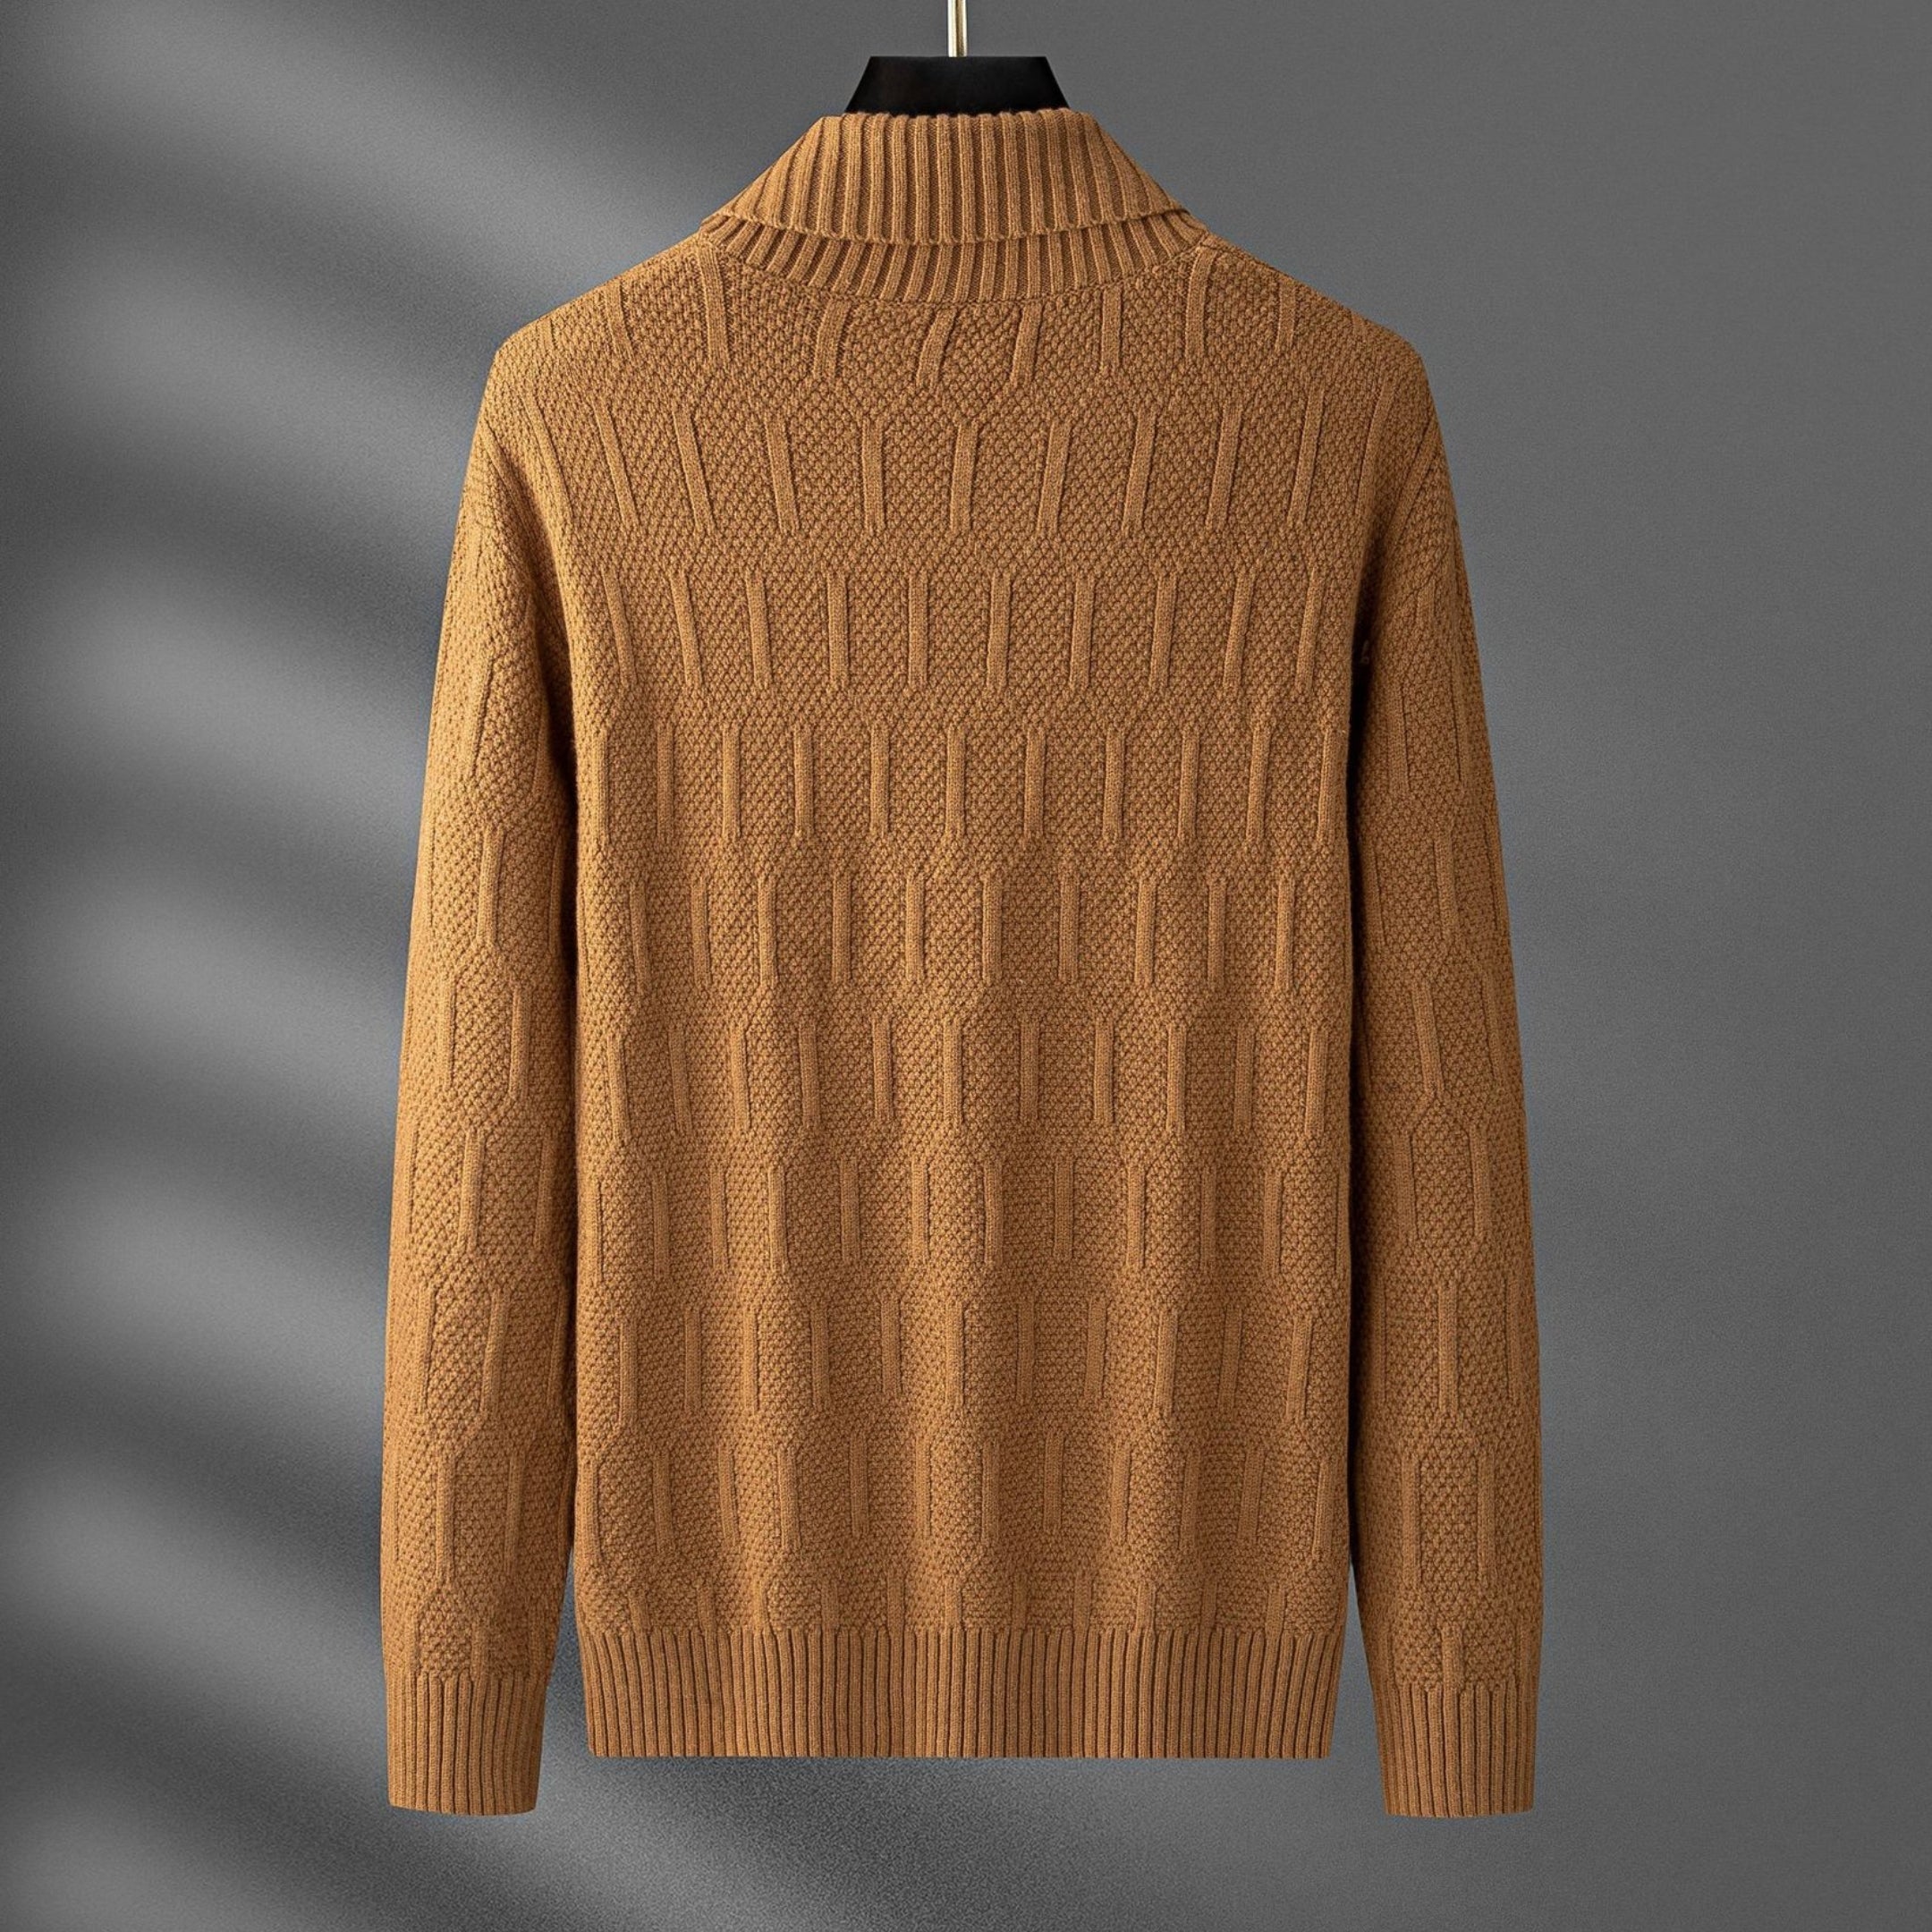 REMY-SINCLAIRE 100% VIRGIN WOOL SWEATER